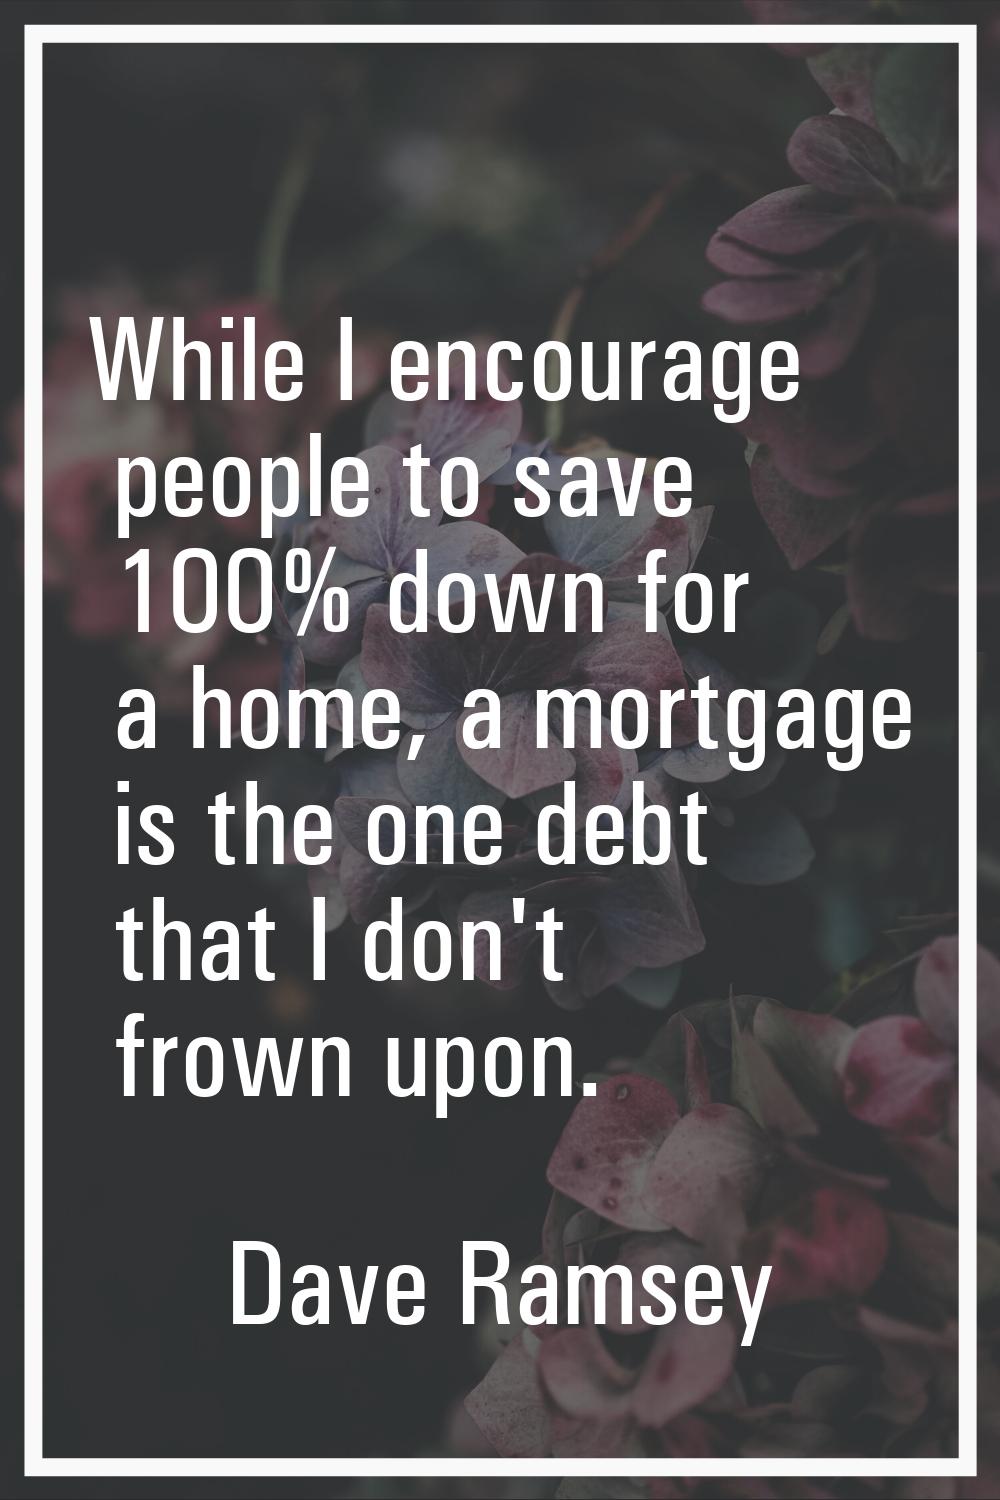 While I encourage people to save 100% down for a home, a mortgage is the one debt that I don't frow